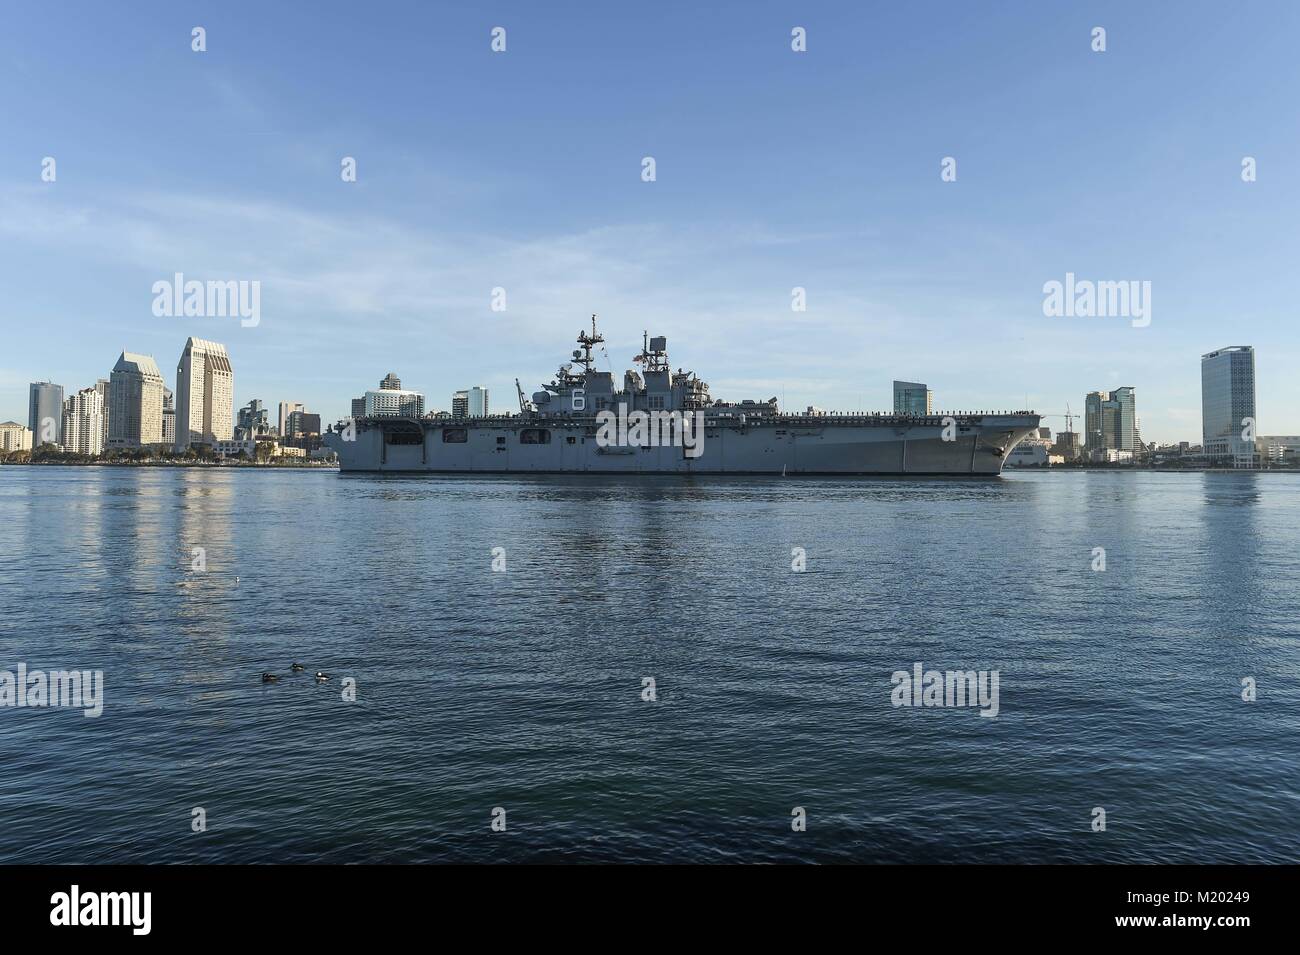 SAN DIEGO (Feb. 2, 2018) The amphibious assault ship USS America (LHA 6) transits San Diego Bay while returning to its Naval Base San Diego homeport following their first operational deployment. America, part of the America Amphibious Ready Group, with embarked 15th Marine Expeditionary Unit, is returning from a regularly scheduled deployment to the Western Pacific and Middle East. The U.S. Navy has patrolled the Indo-Pacific region routinely for more than 70 years promoting peace and security. (U.S. Navy photo by Melissa K. Russell/Released) Stock Photo